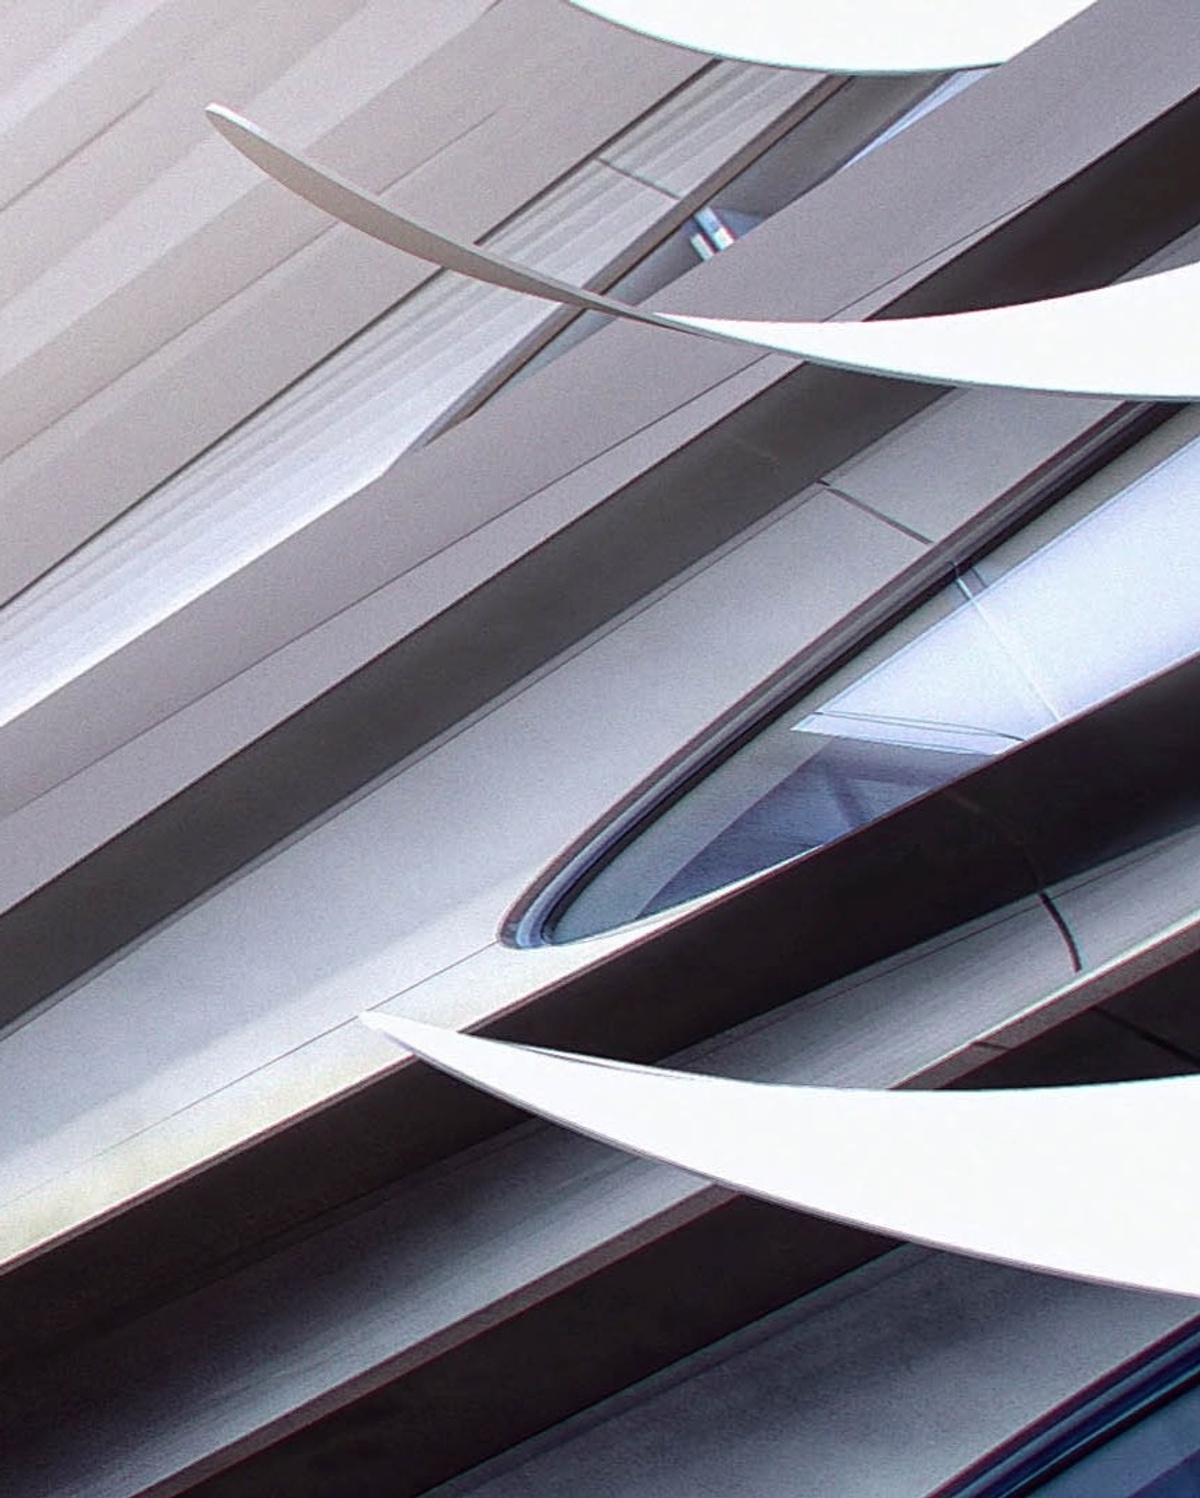 Close-up of avant garde form of exterior building, resembling sleek, aerial structures 